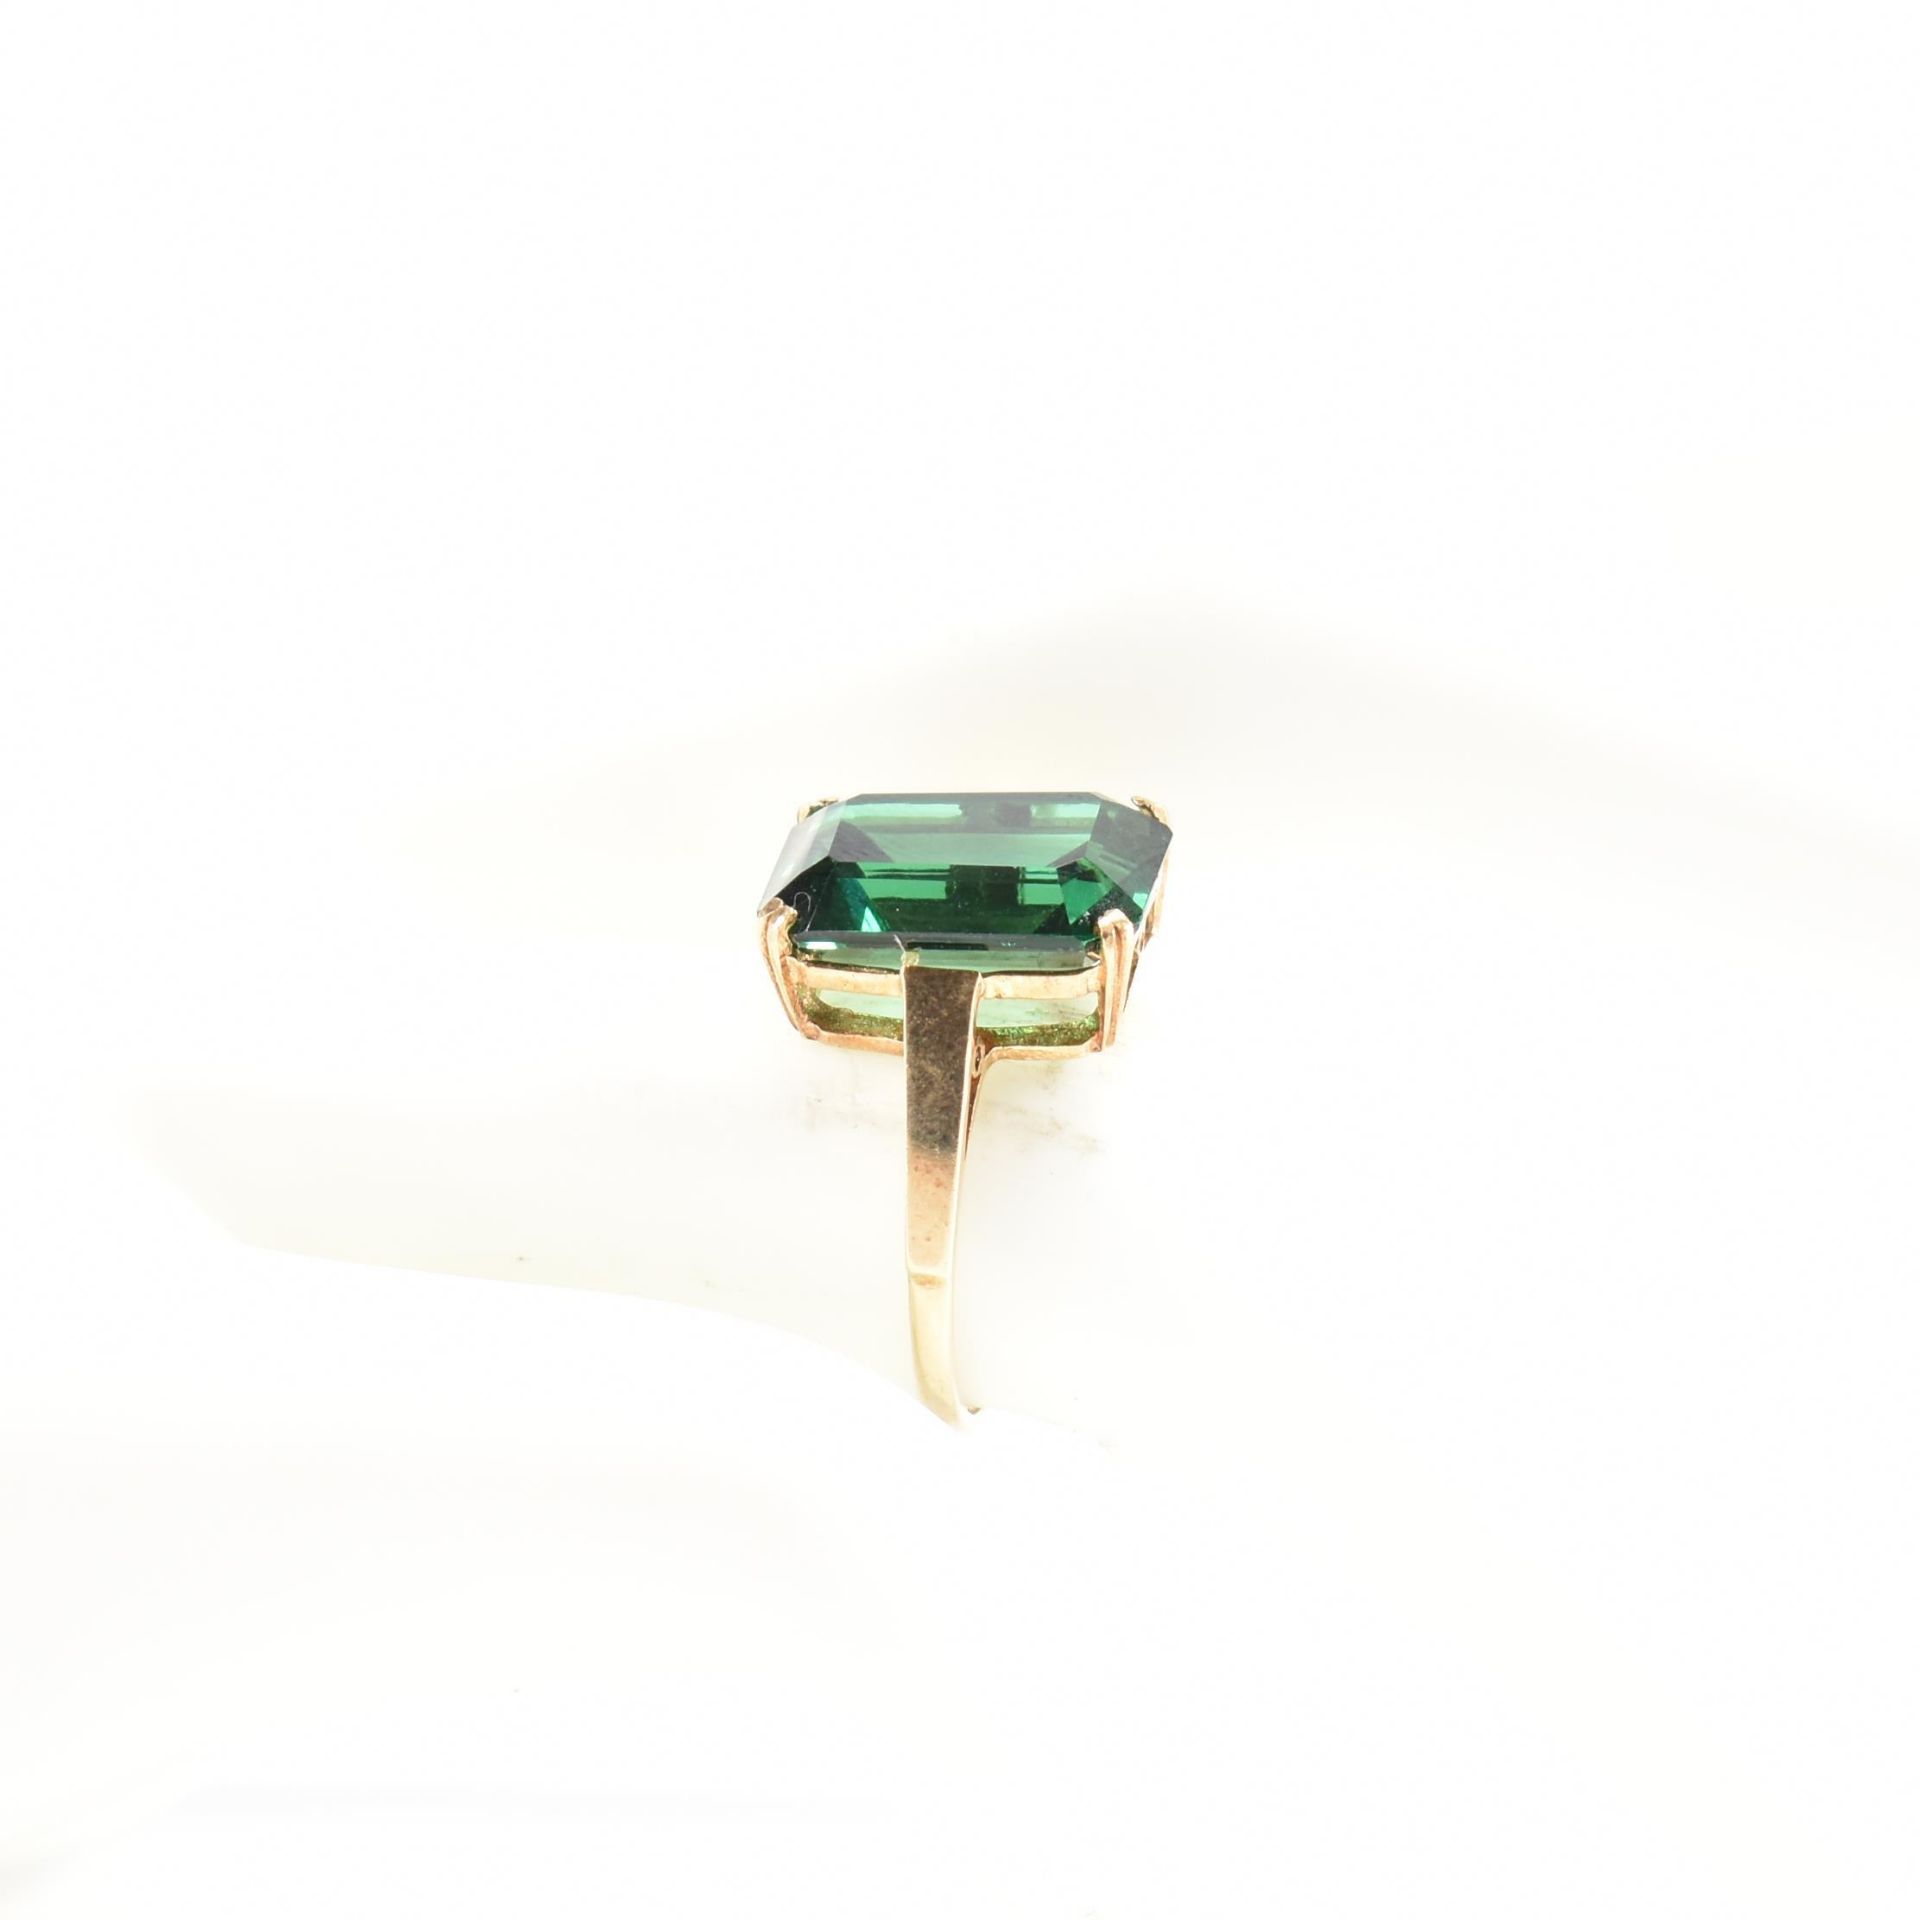 HALLMARKED 9CT GOLD & SYNTHETIC SPINEL RING - Image 7 of 7